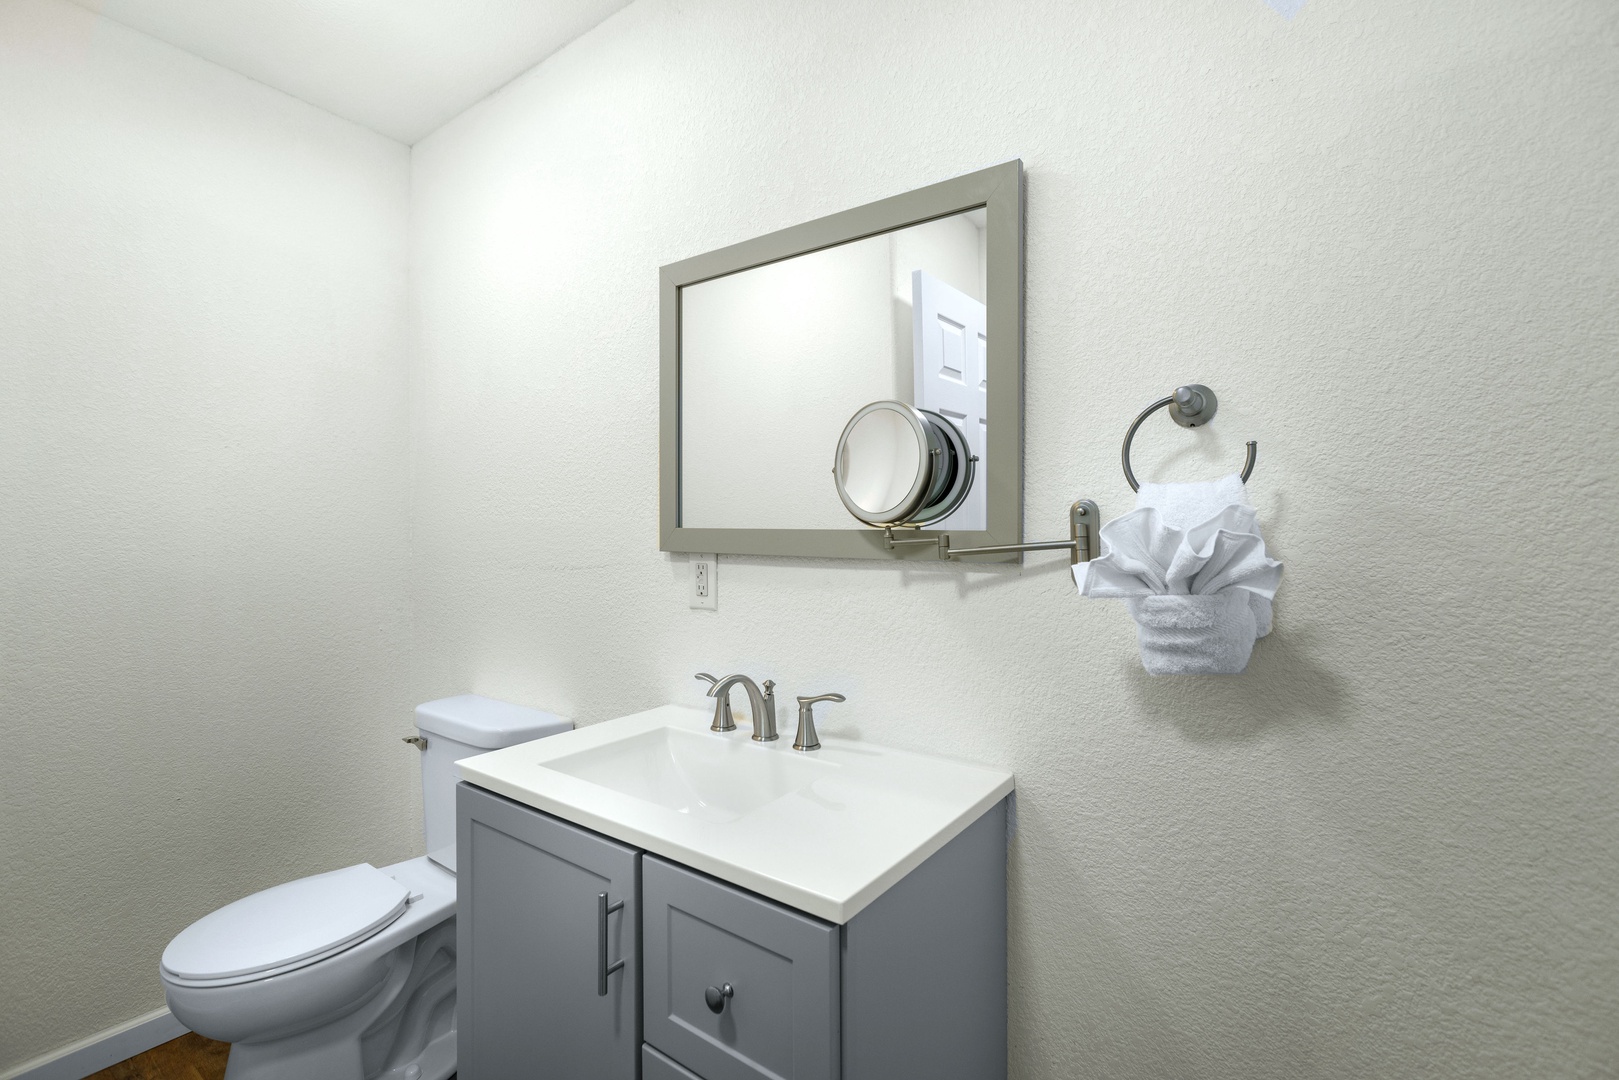 This home offers a stylish, convenient half bath with magnifying mirror